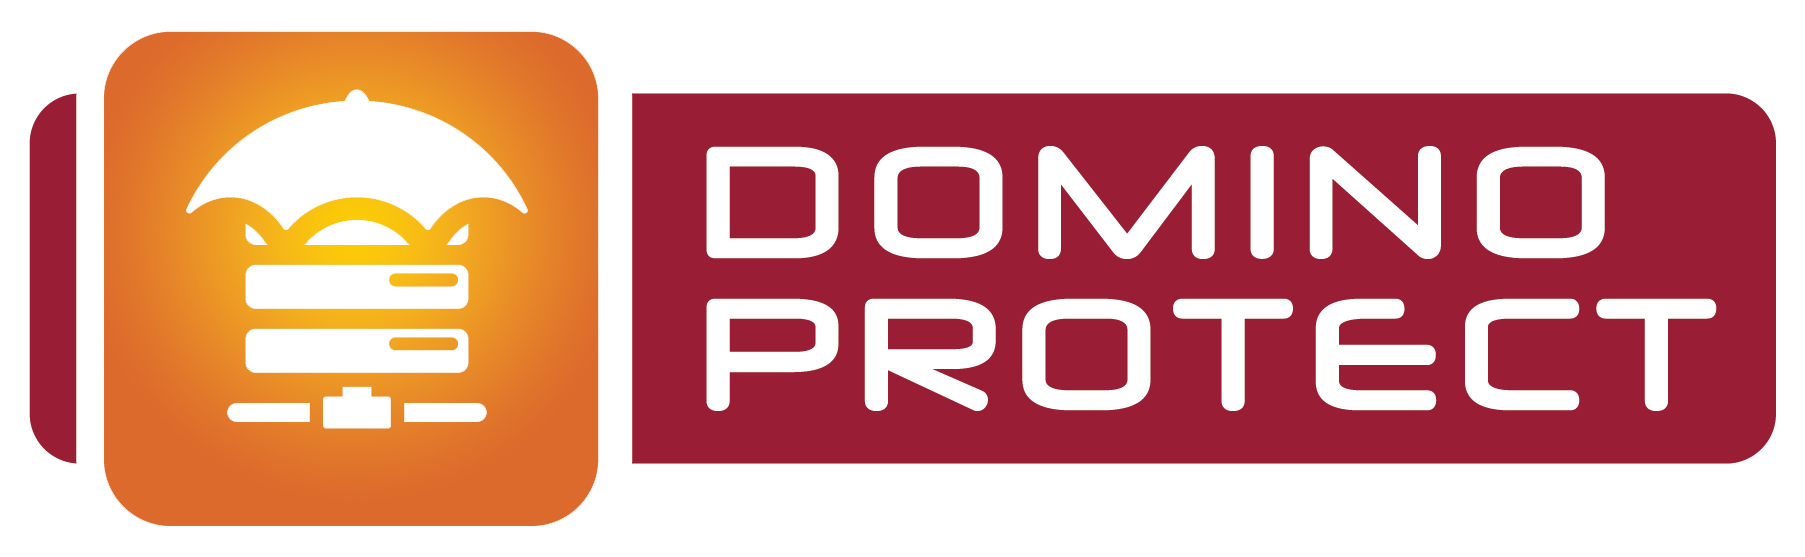 BCC DominoProtect product logo